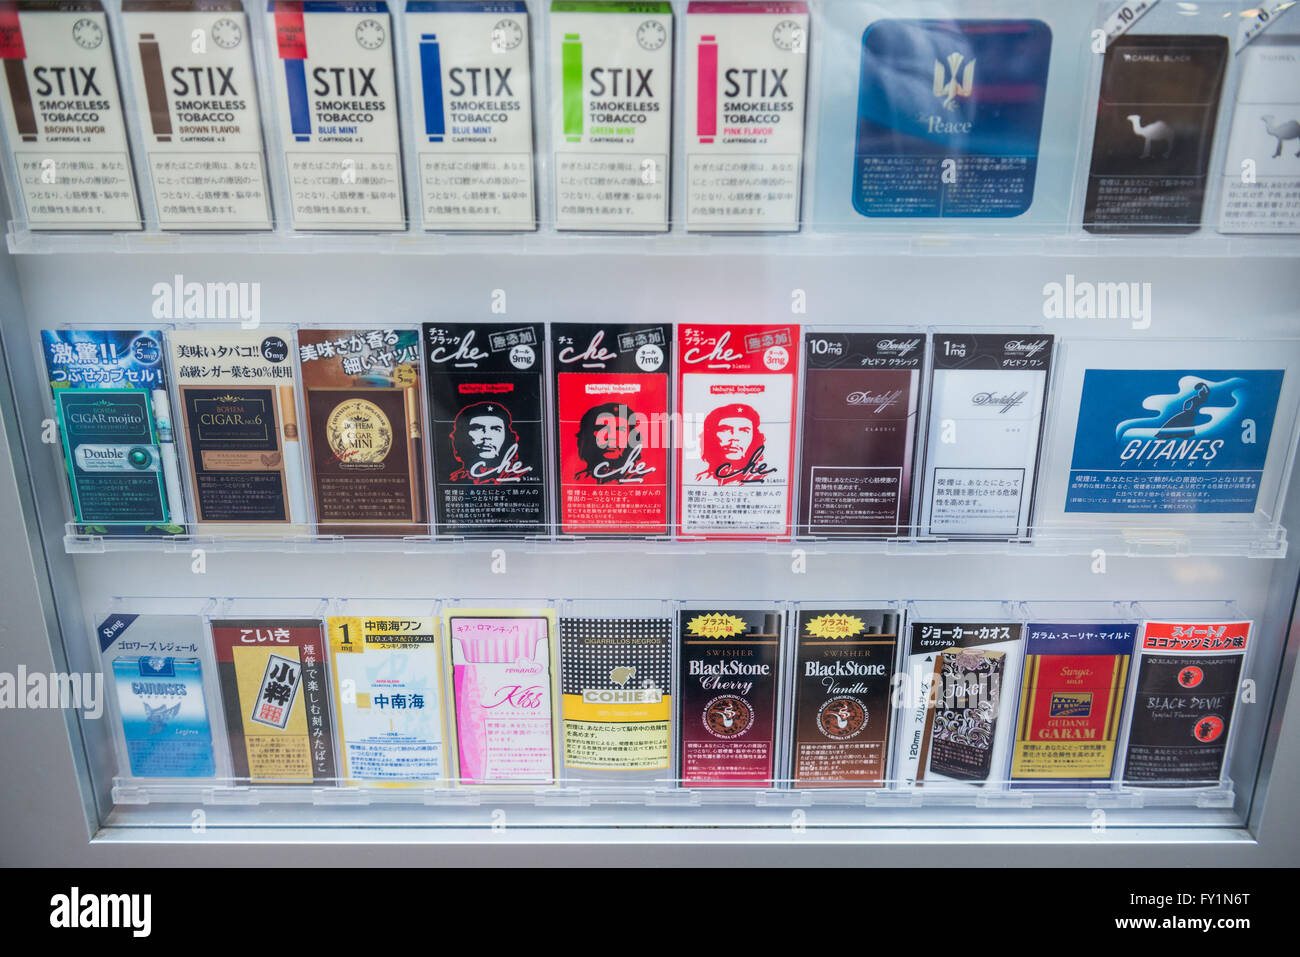 cigarette packages labels in kiosk in Tokyo city, Japan Stock Photo